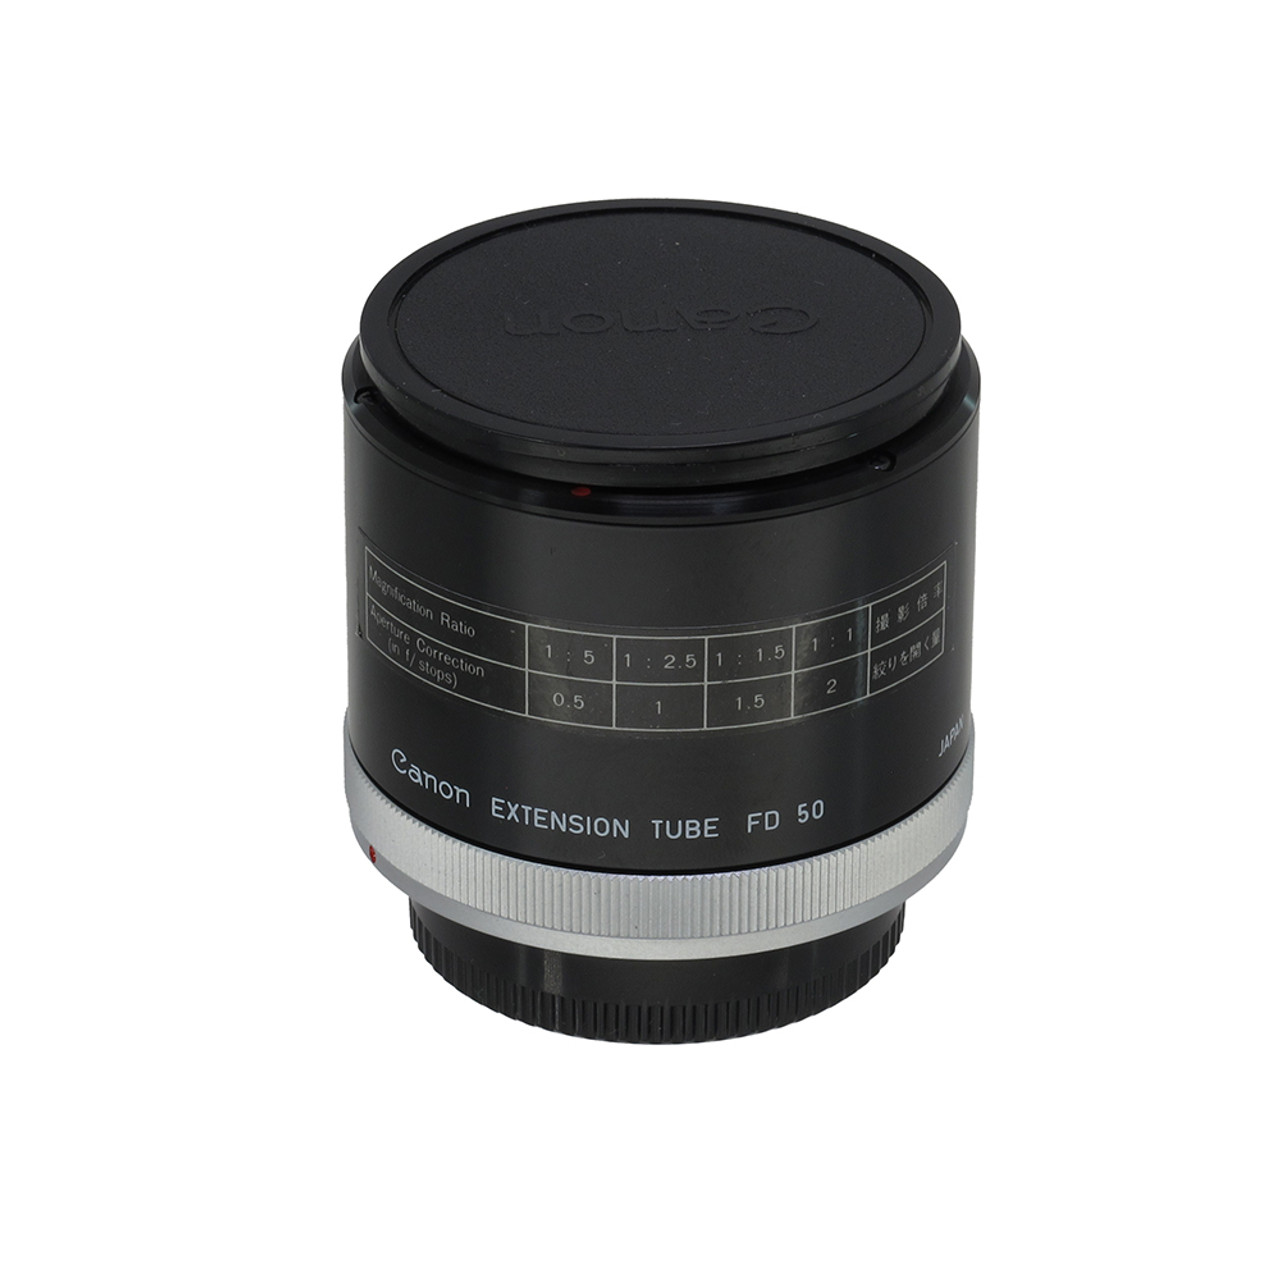 USED CANON FD EXTENSION TUBE 50 (744036)